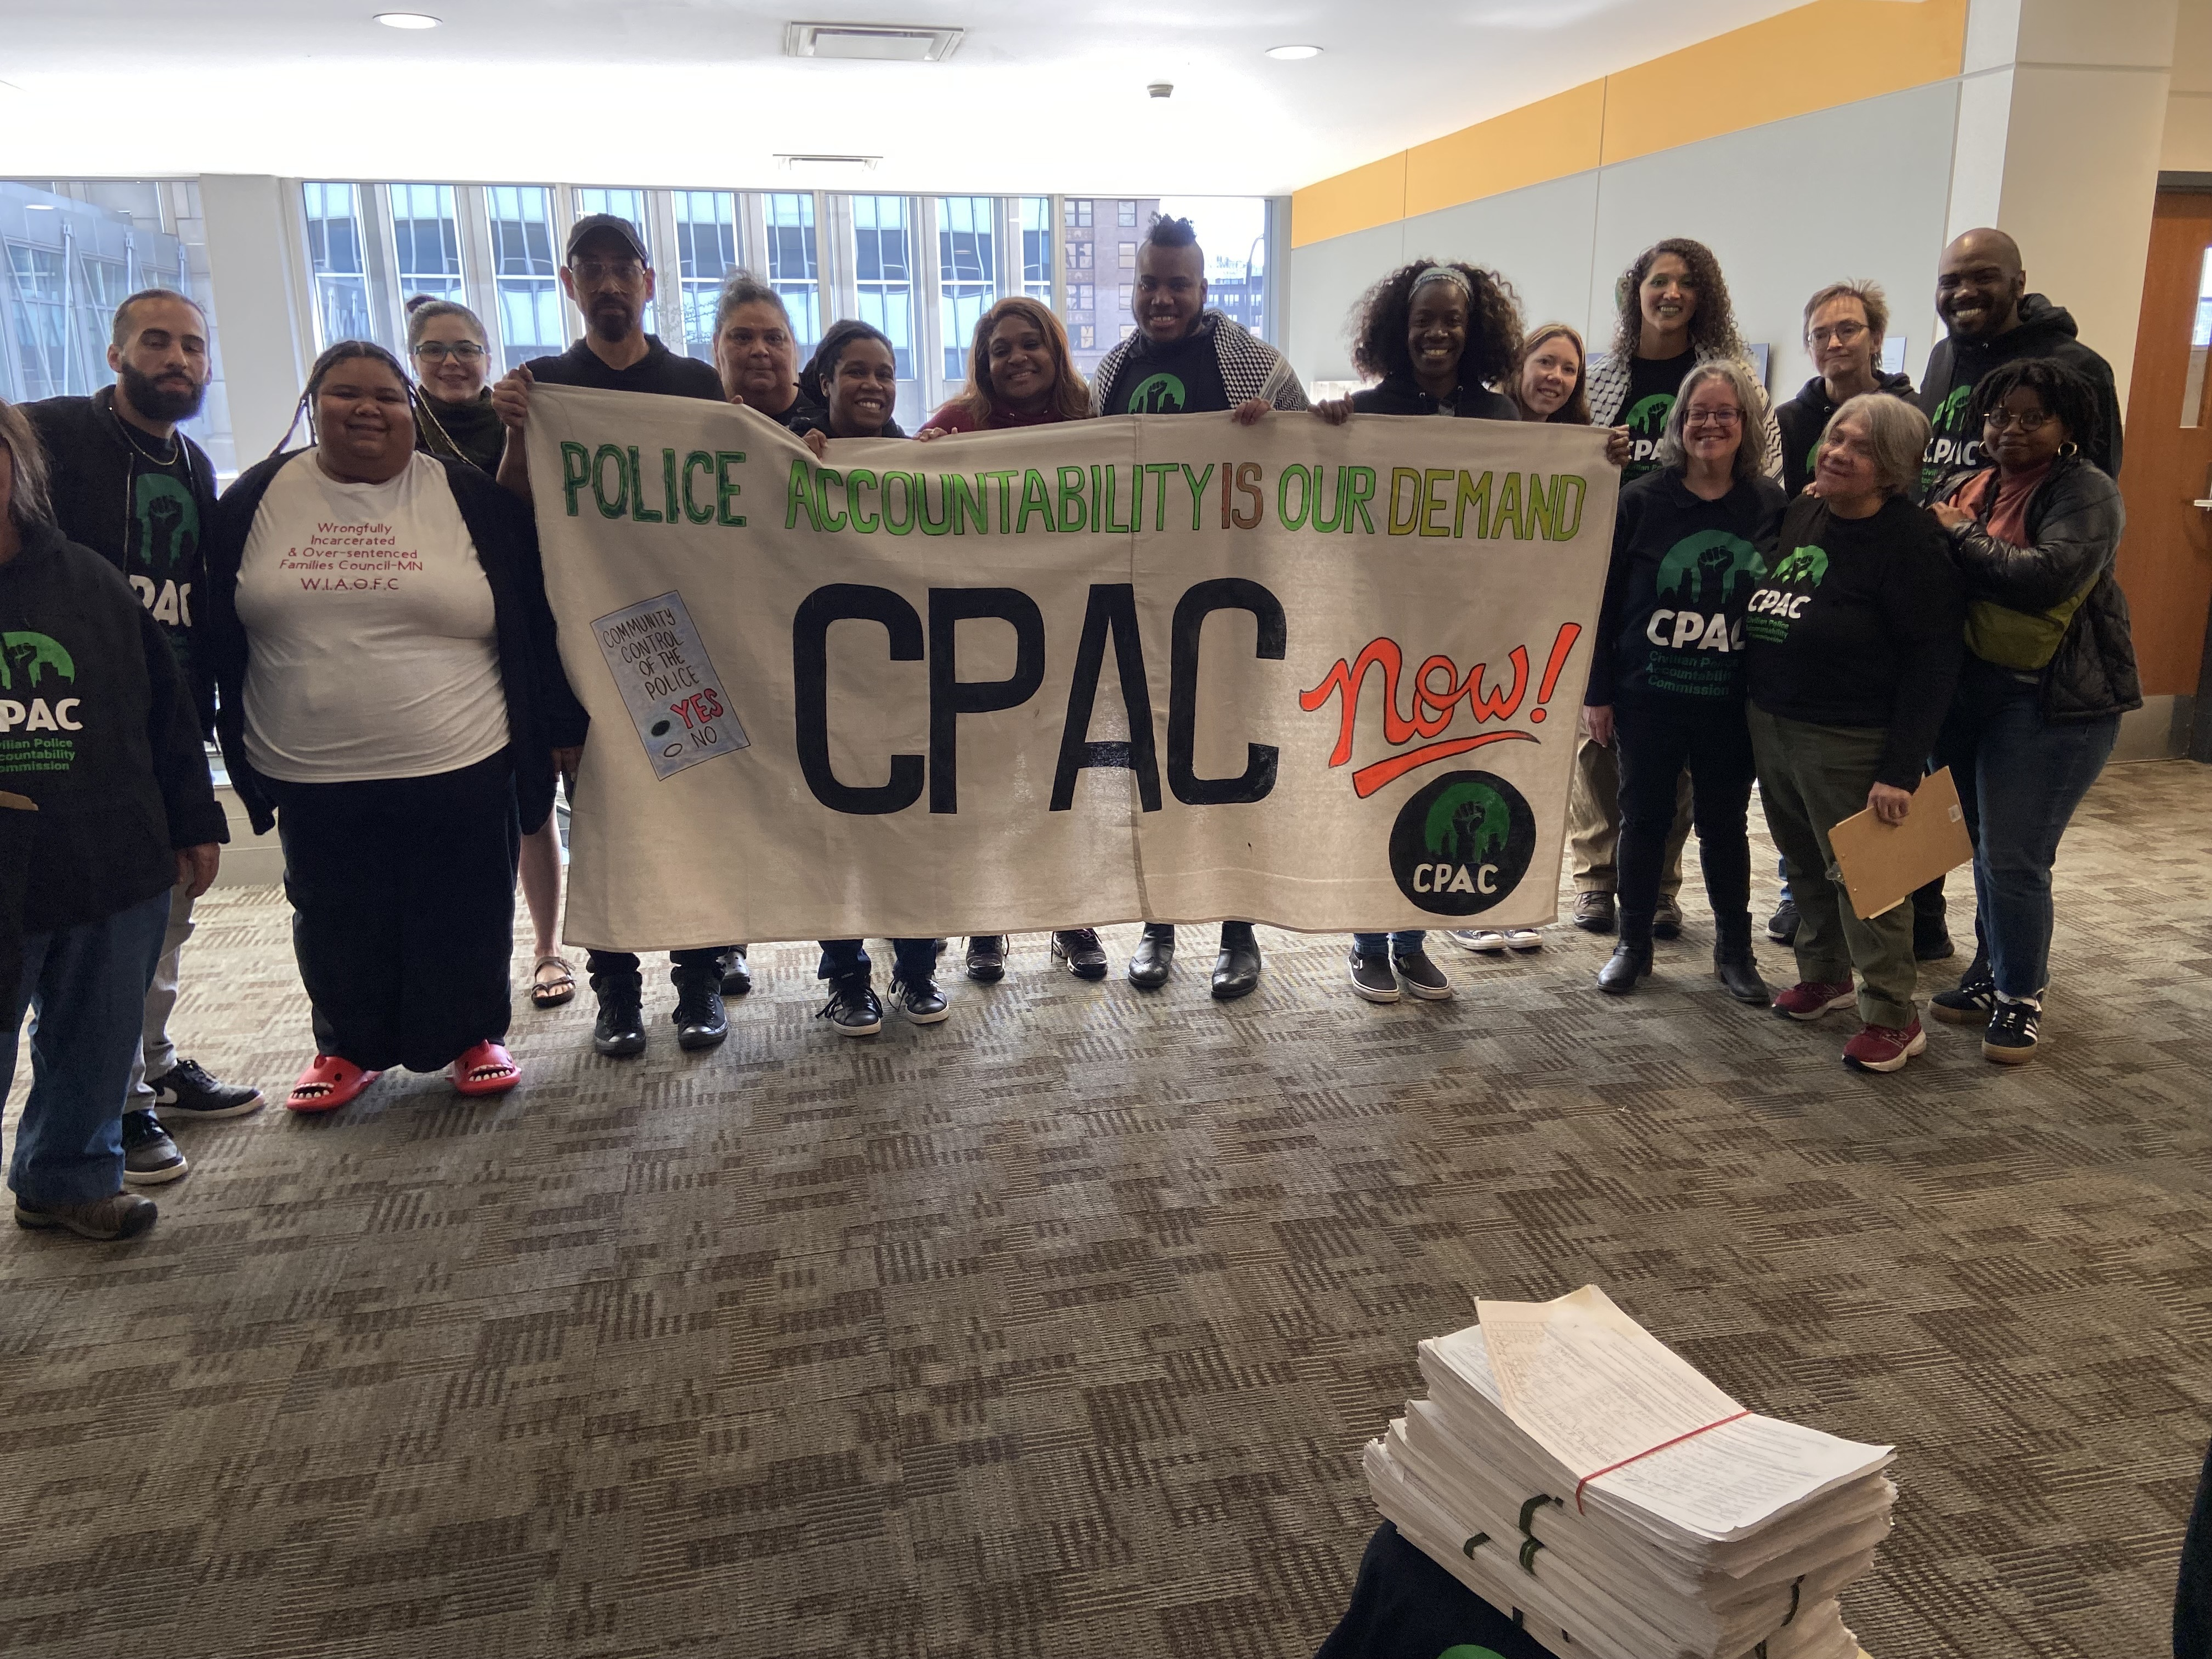 CPAC calls for citizen oversight in the Minneapolis Police Department